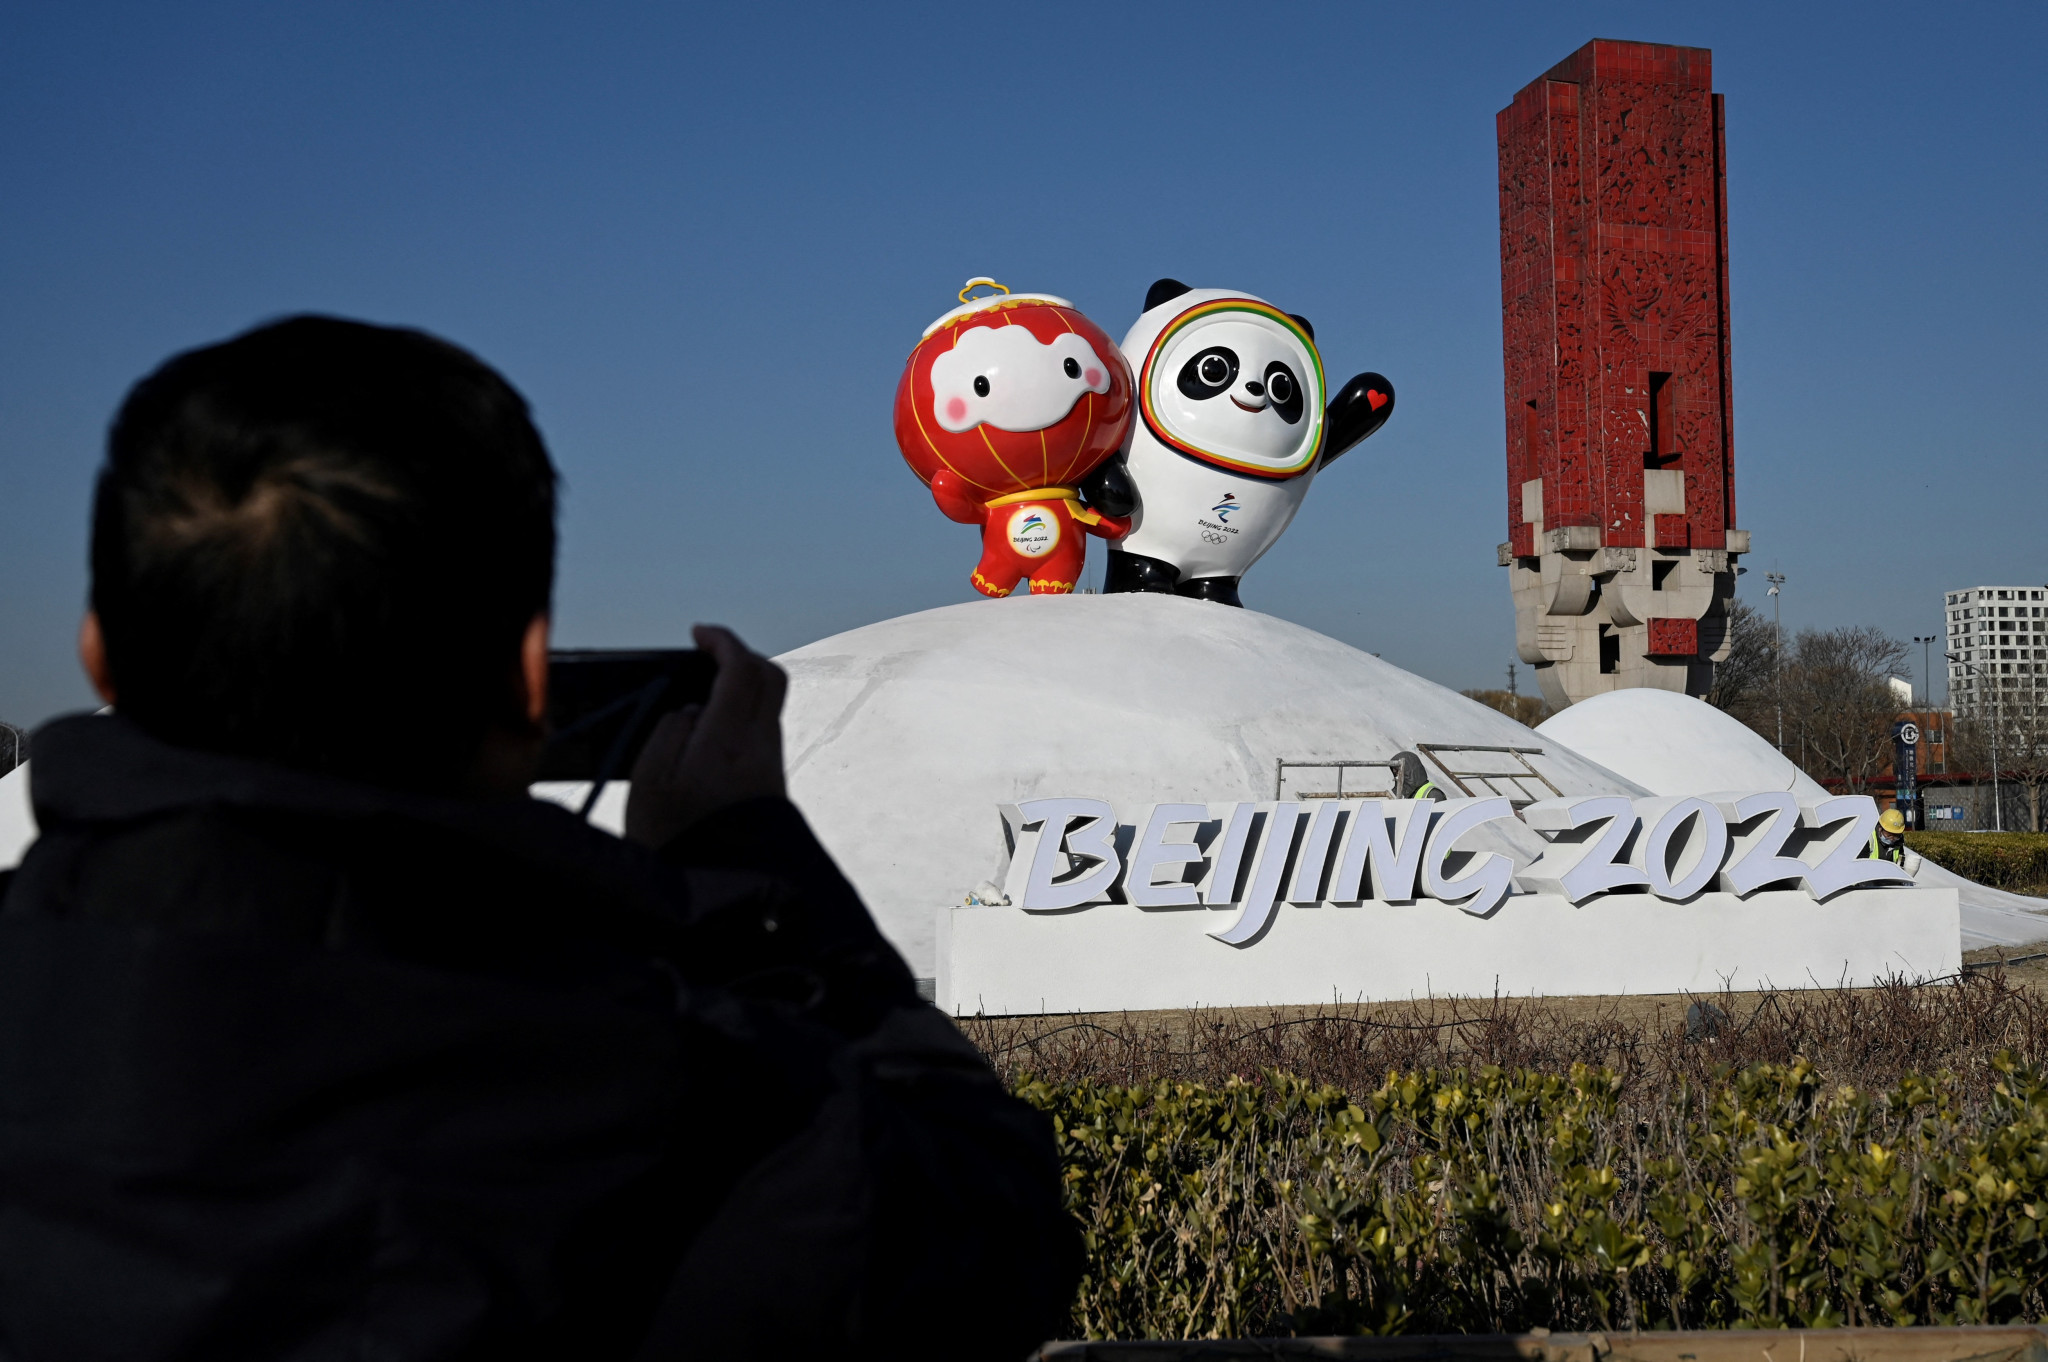 IOC fears COVID-hit athletes will "cut it very close" for Beijing 2022 under travel rules